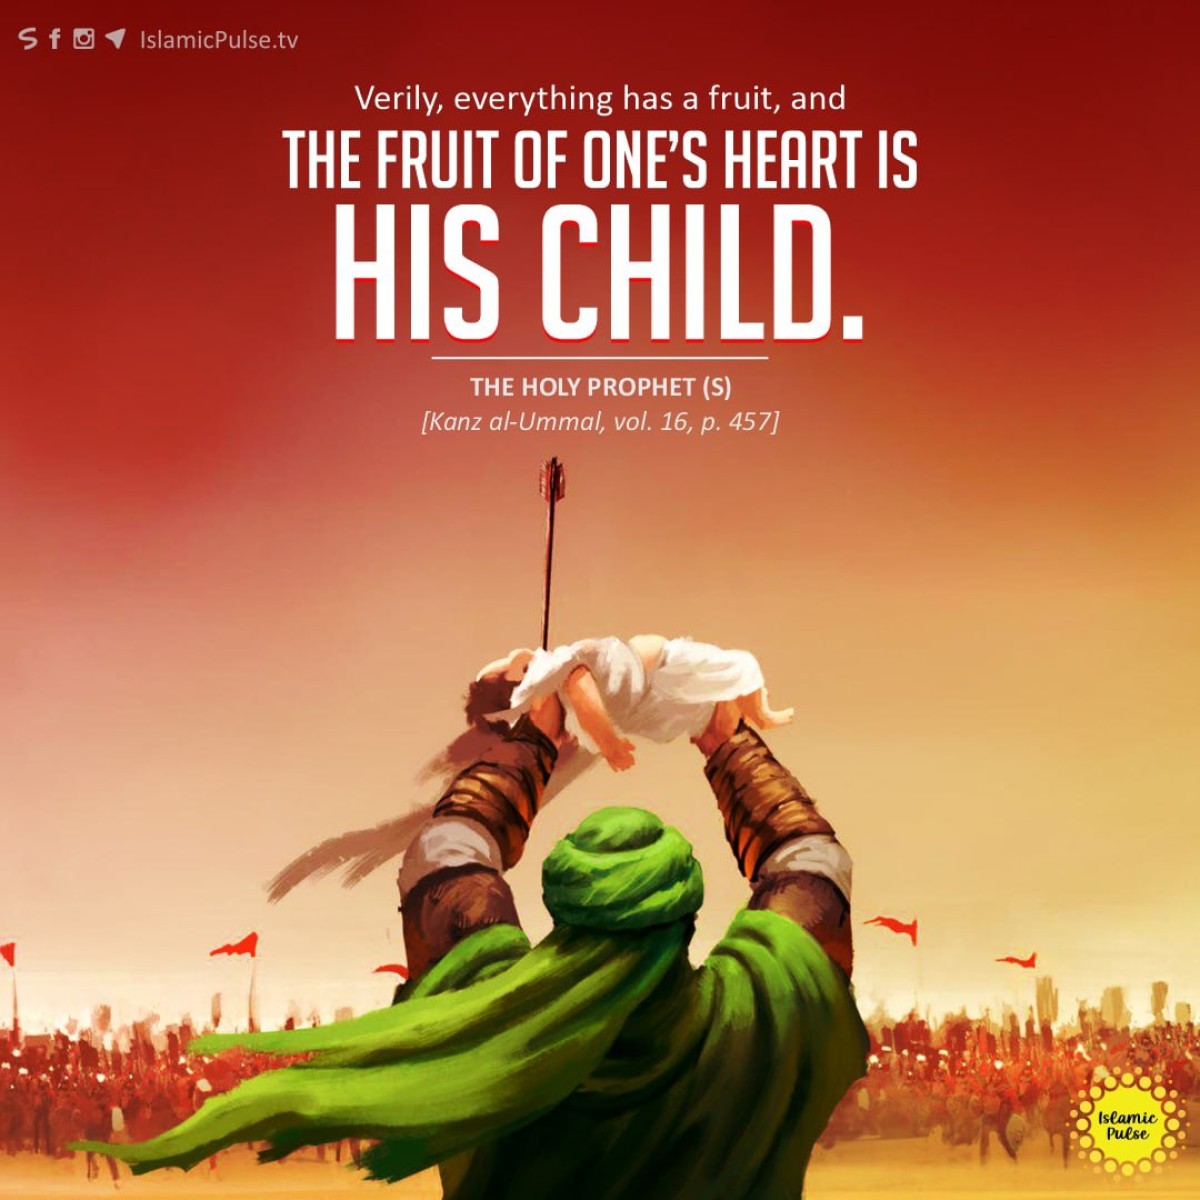 "Verily, everything has a fruit, and the fruit of one’s heart is his child."